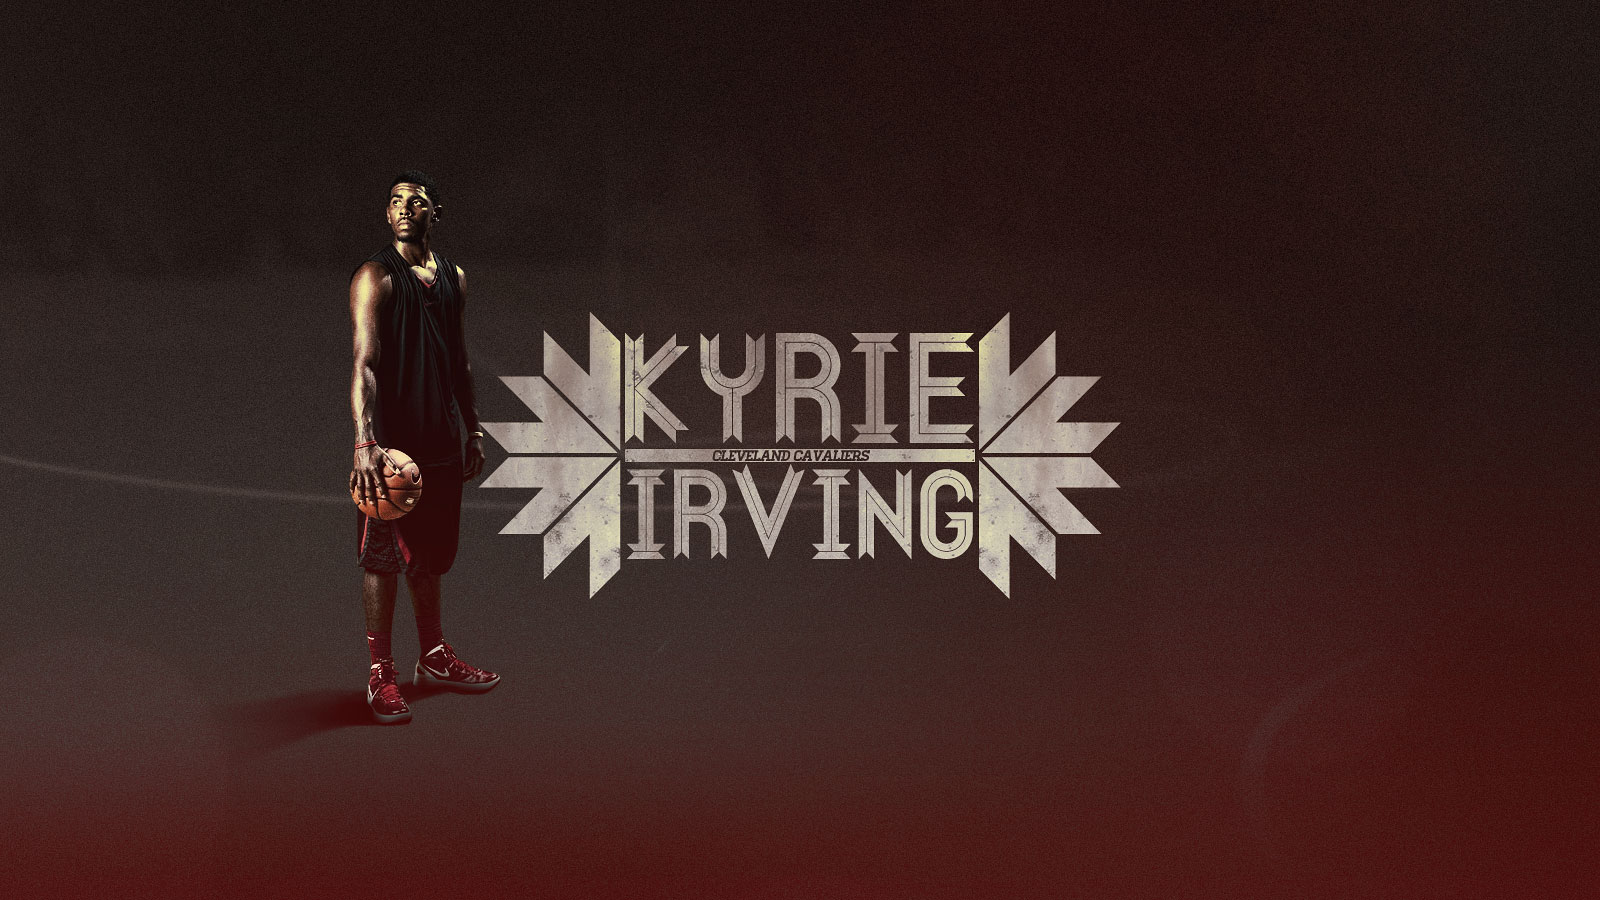 cleveland cavaliers wallpaper kyrie irving